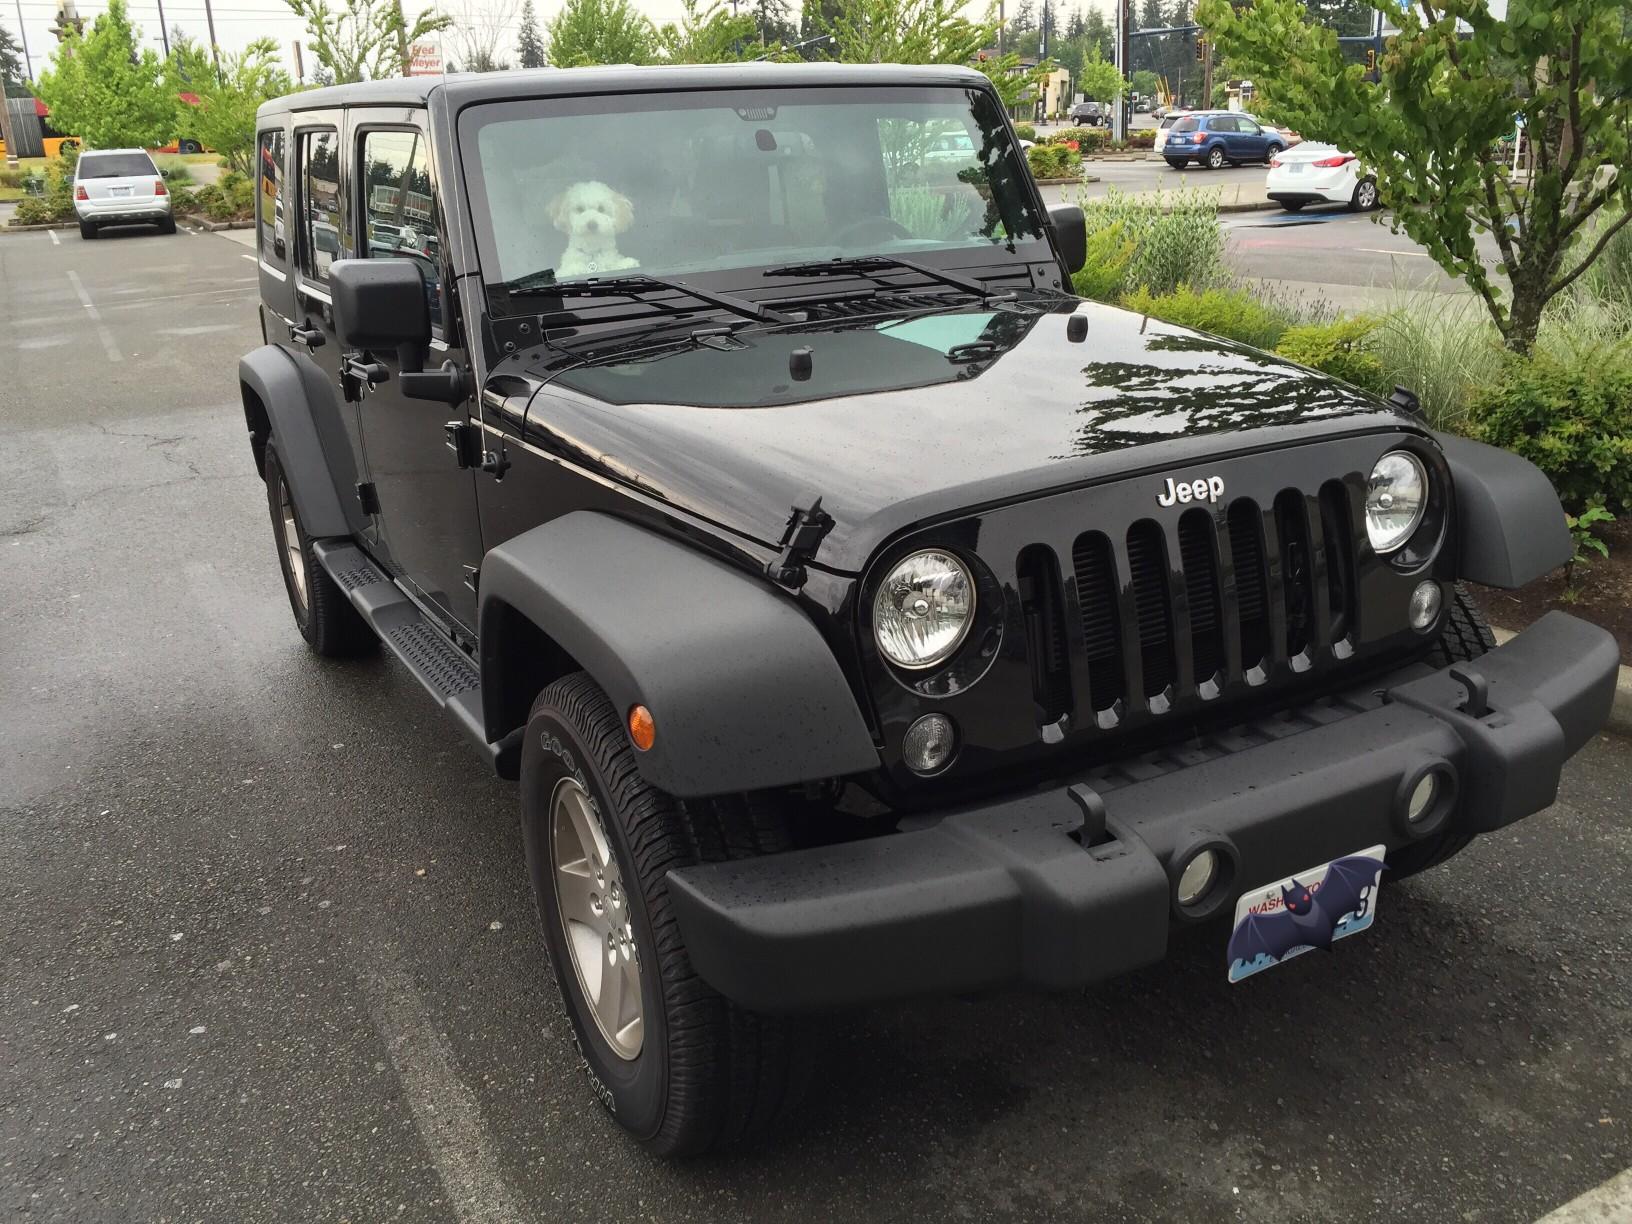 A black Jeep Wrangler in a parking lot.